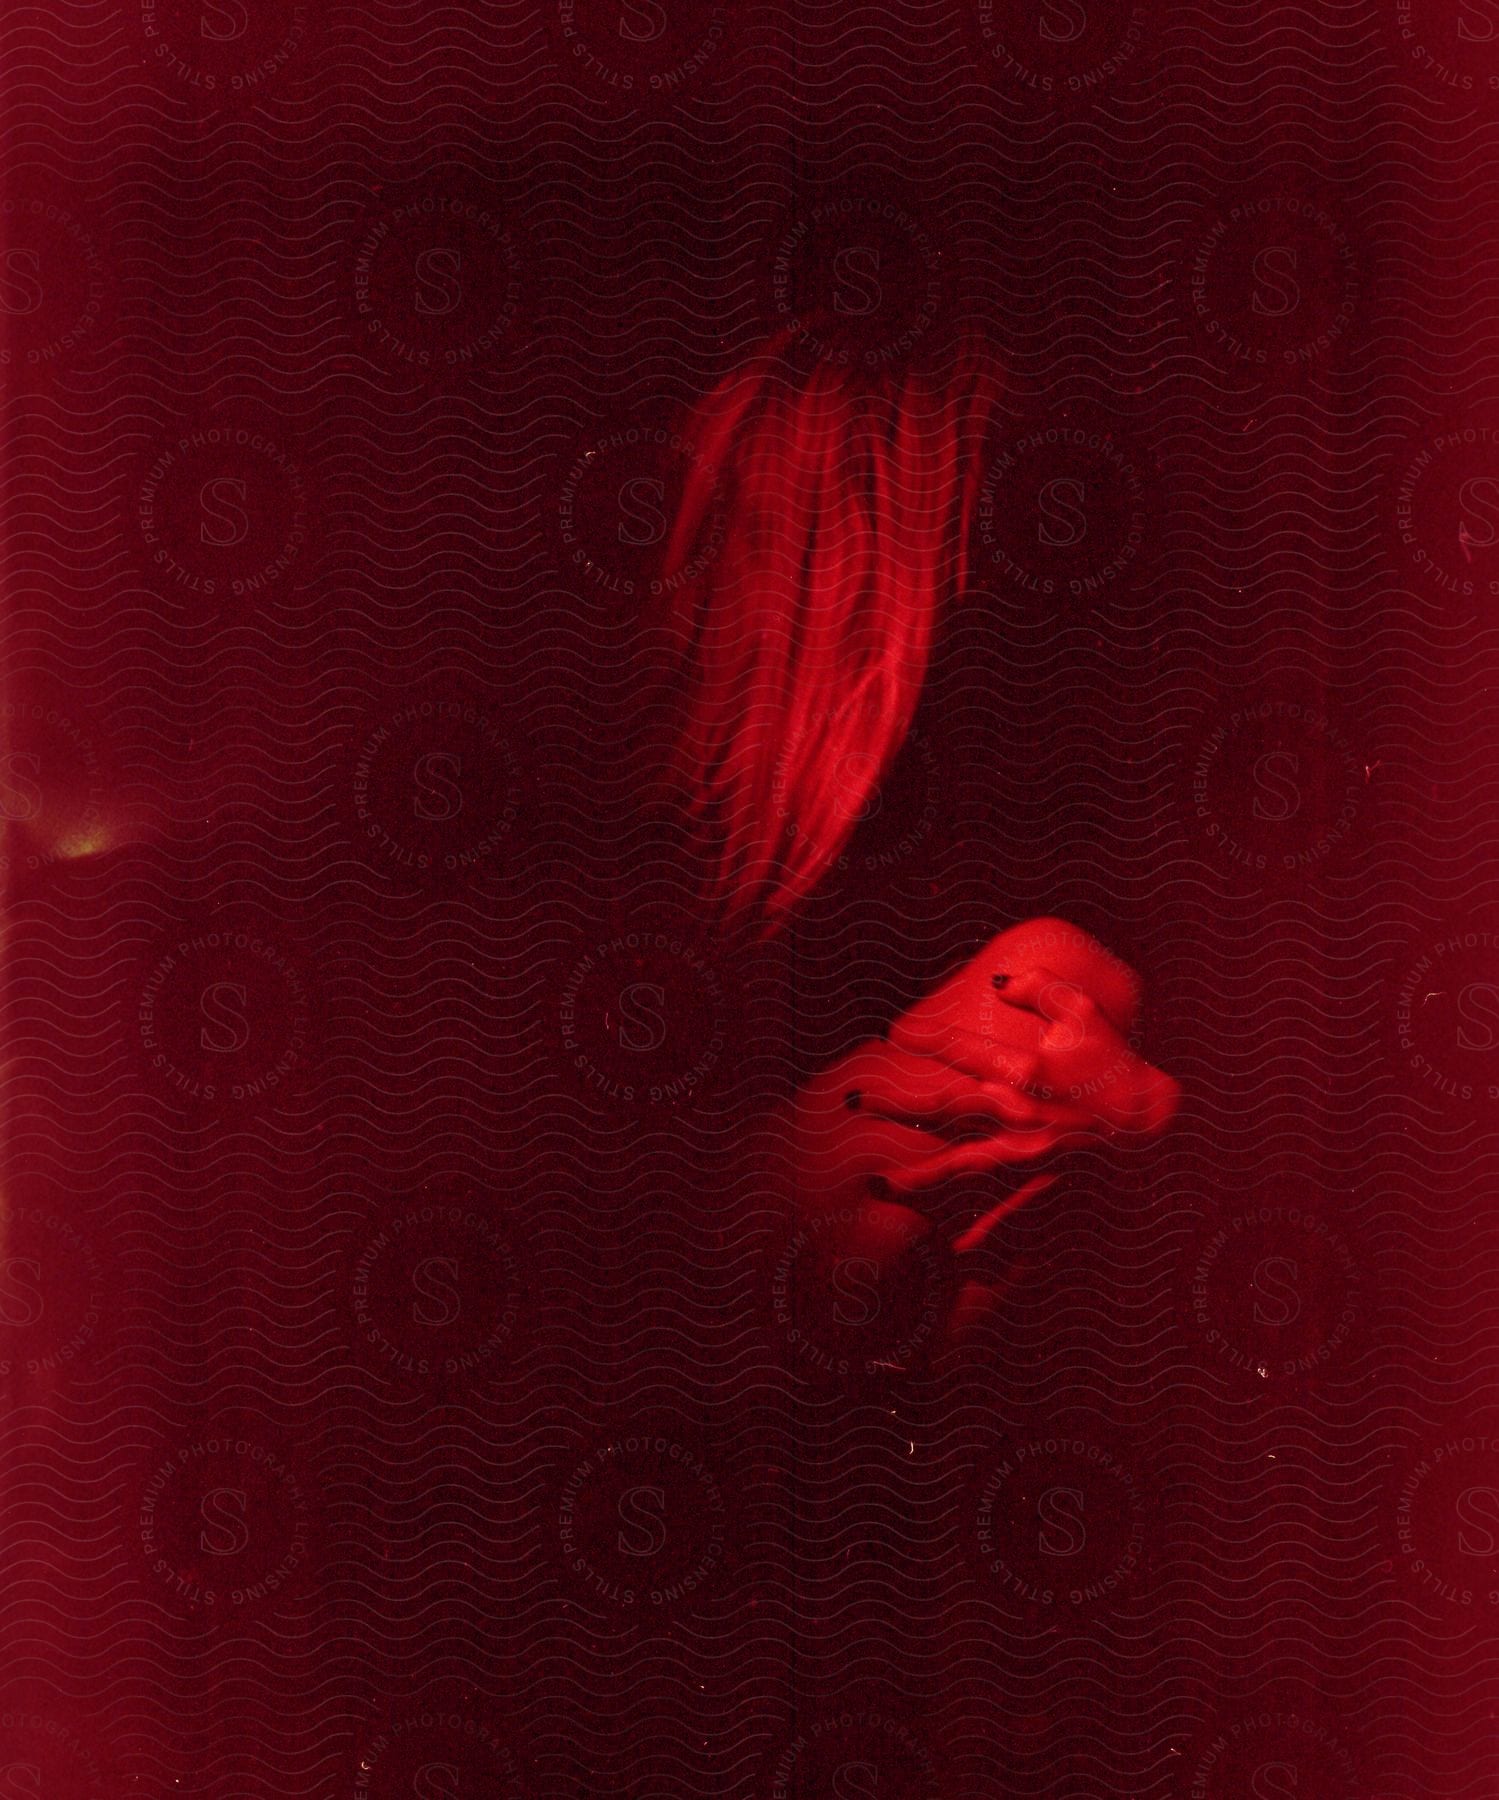 Blonde woman sitting on the floor with her hand against her leg under strong red light